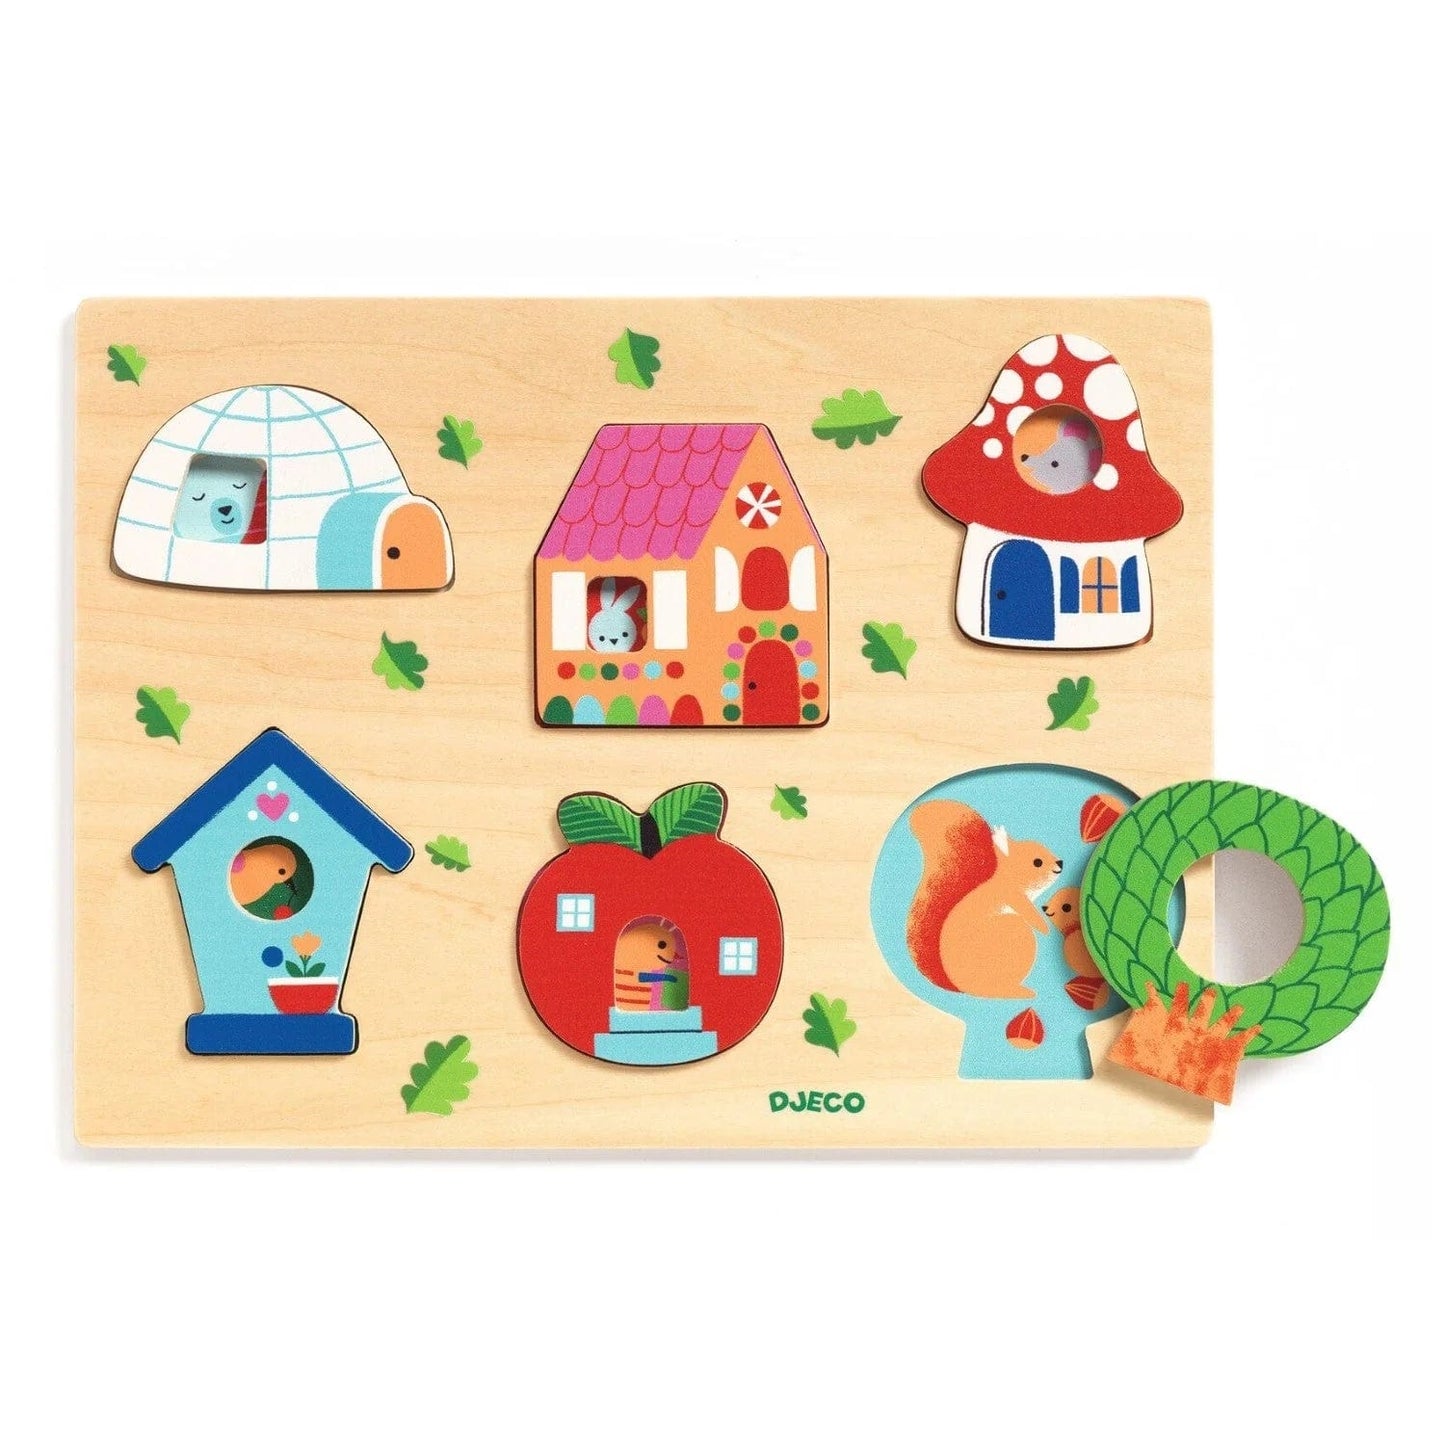 Djeco Chunky Puzzles Default Coucou-House Wood Puzzle